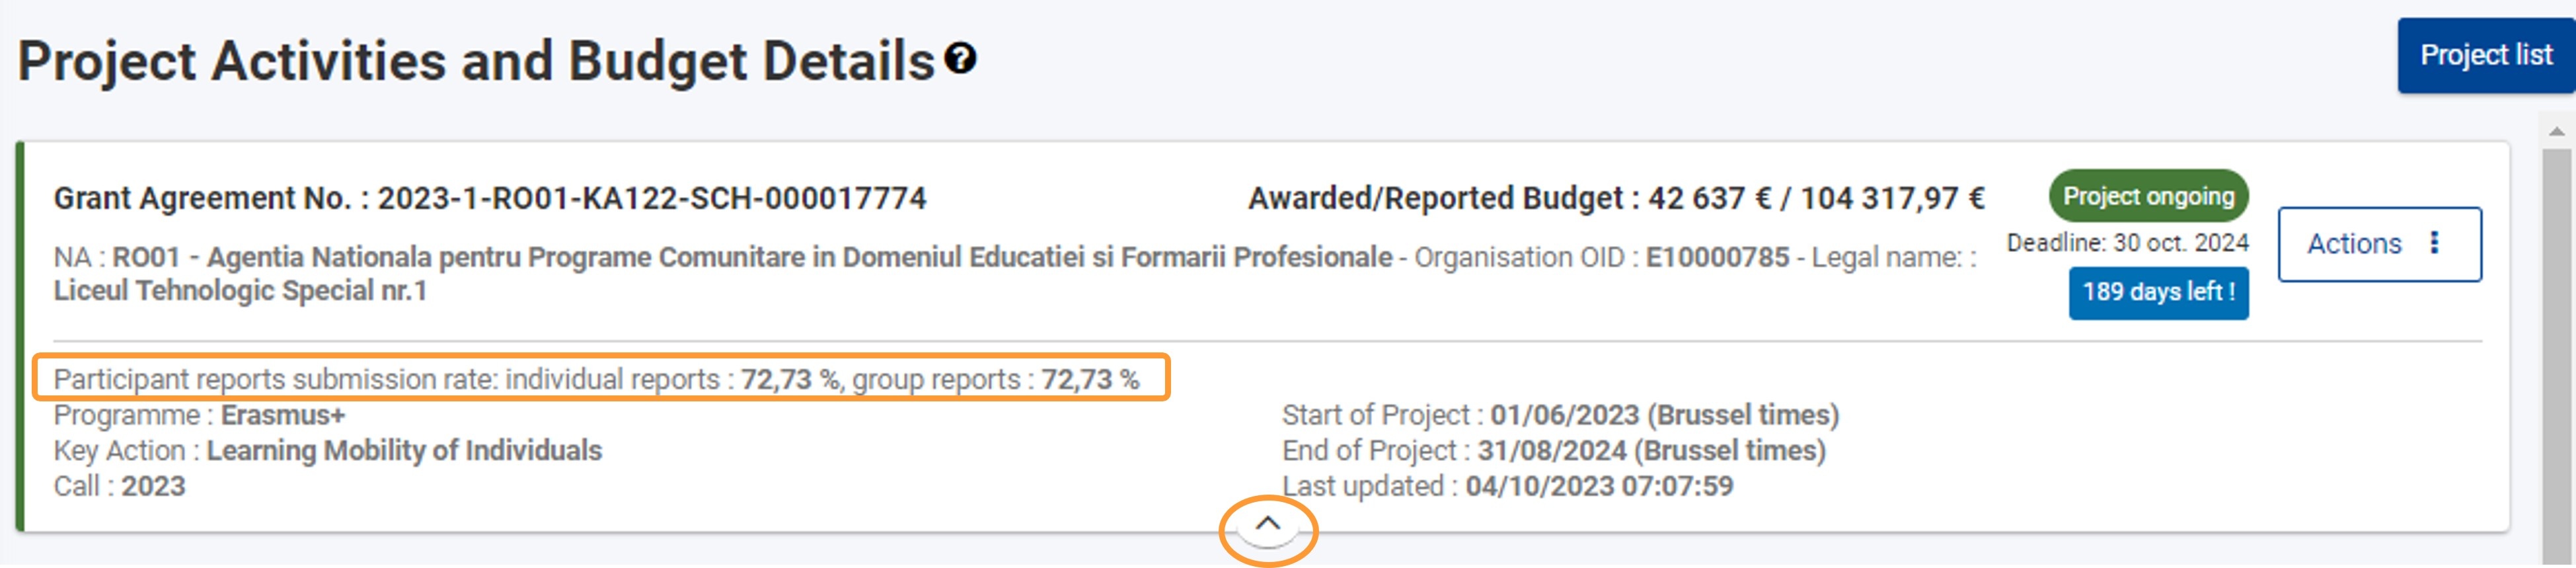 Participant reports submission rate displayed in the expanded header of the project details